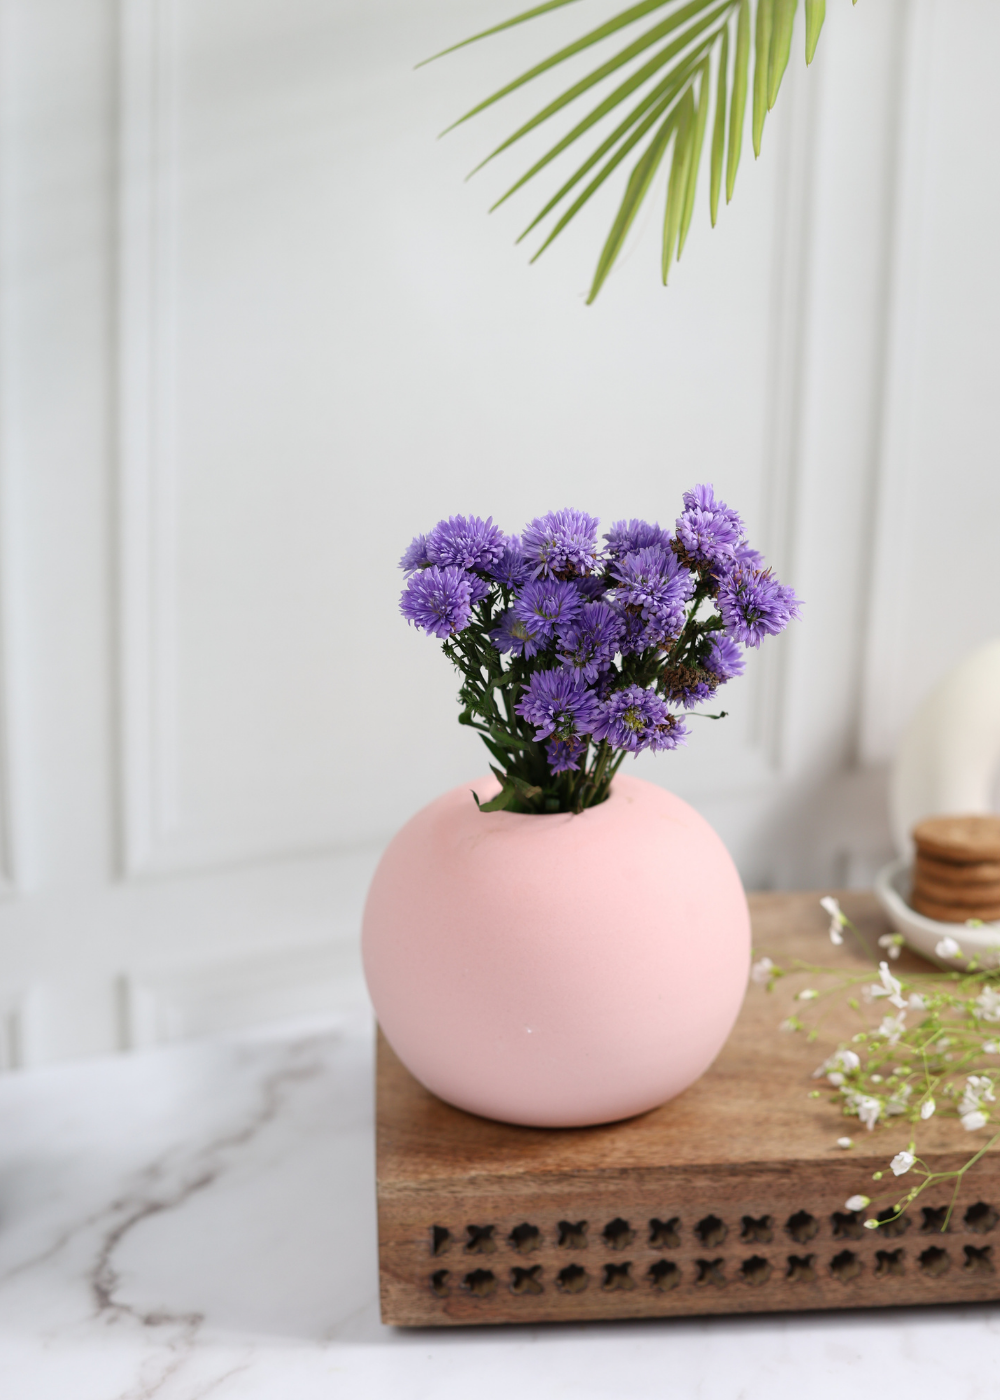 Pink color planter with lavender flowers on a wooden surface